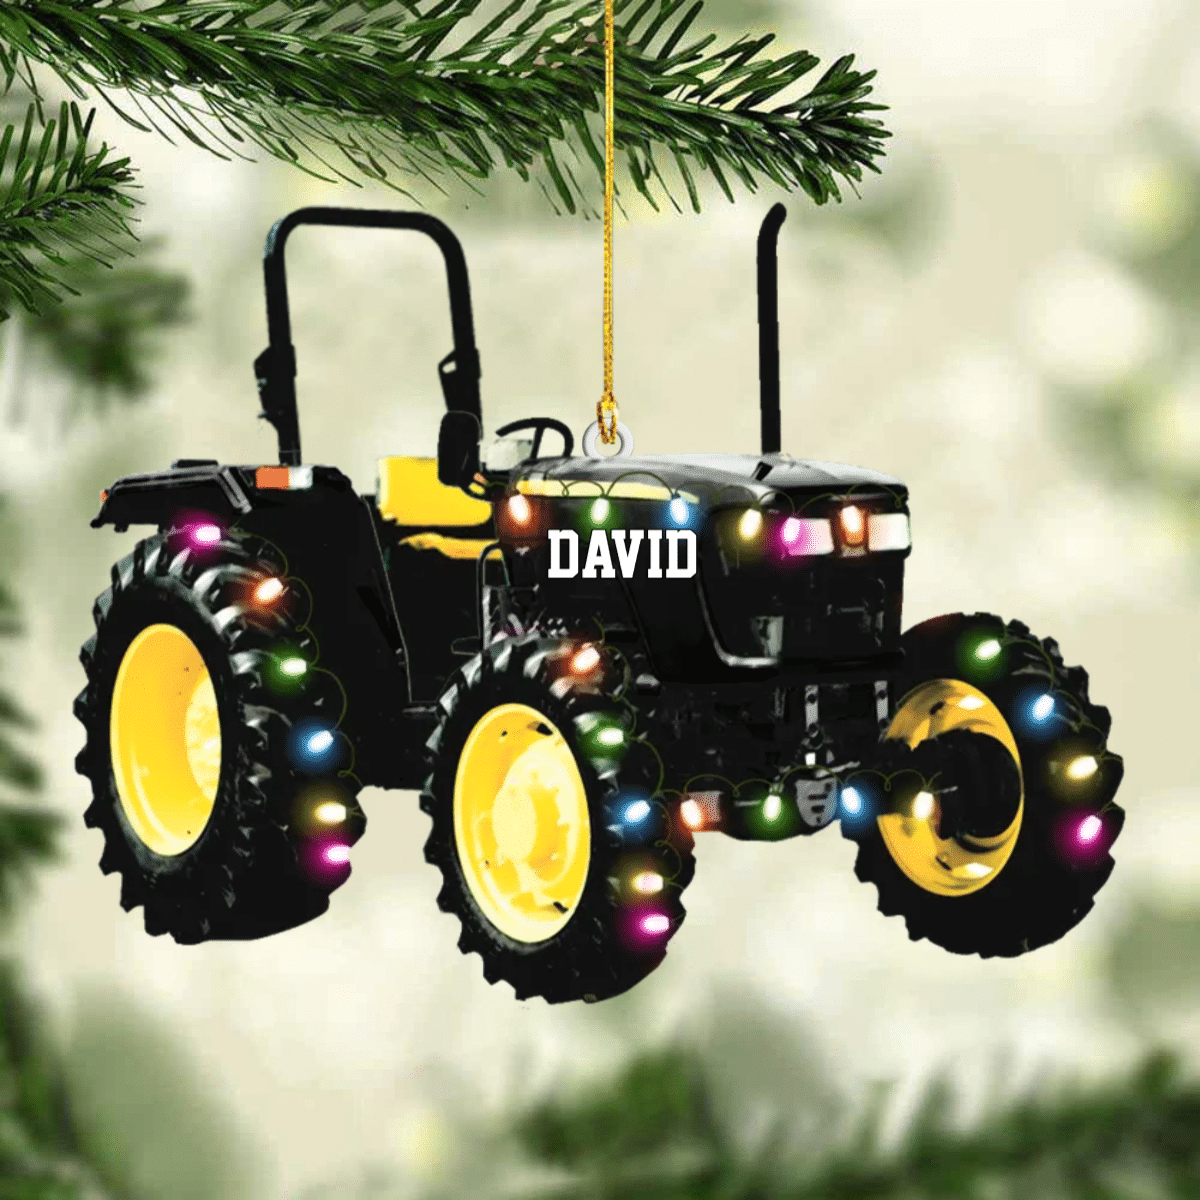 Personalized Tractor Christmas Ornament Version 3 for Farmer/ Gift for Dad